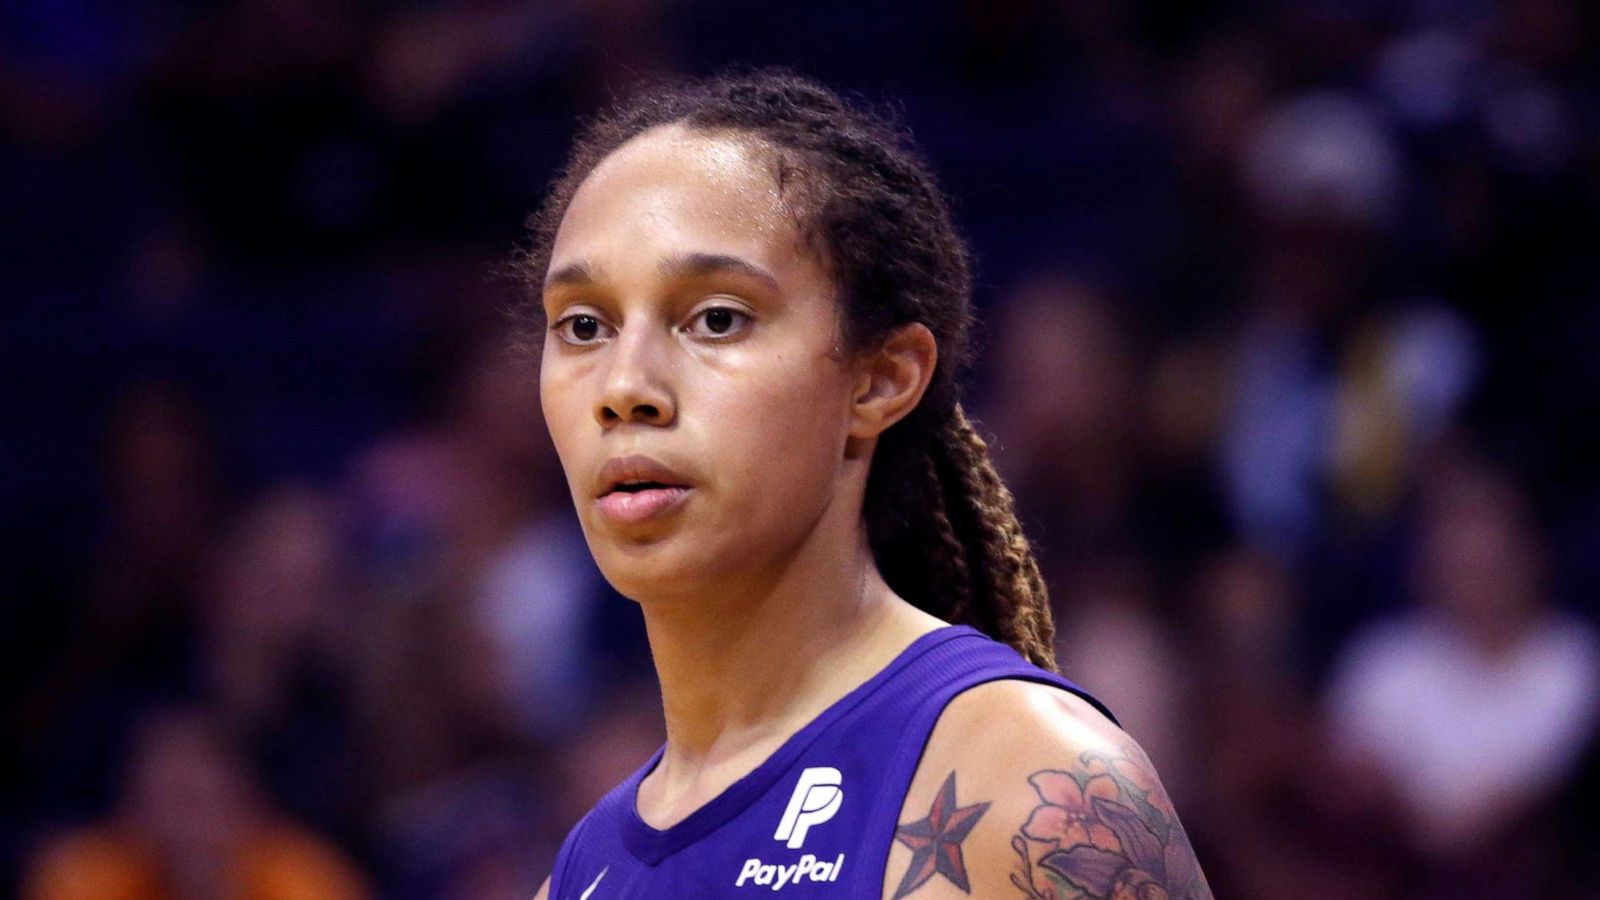 Wnba Star Brittney Griner S Pre Trial Detention In Russia Extended As Us Works To Negotiate Her Release Abc News